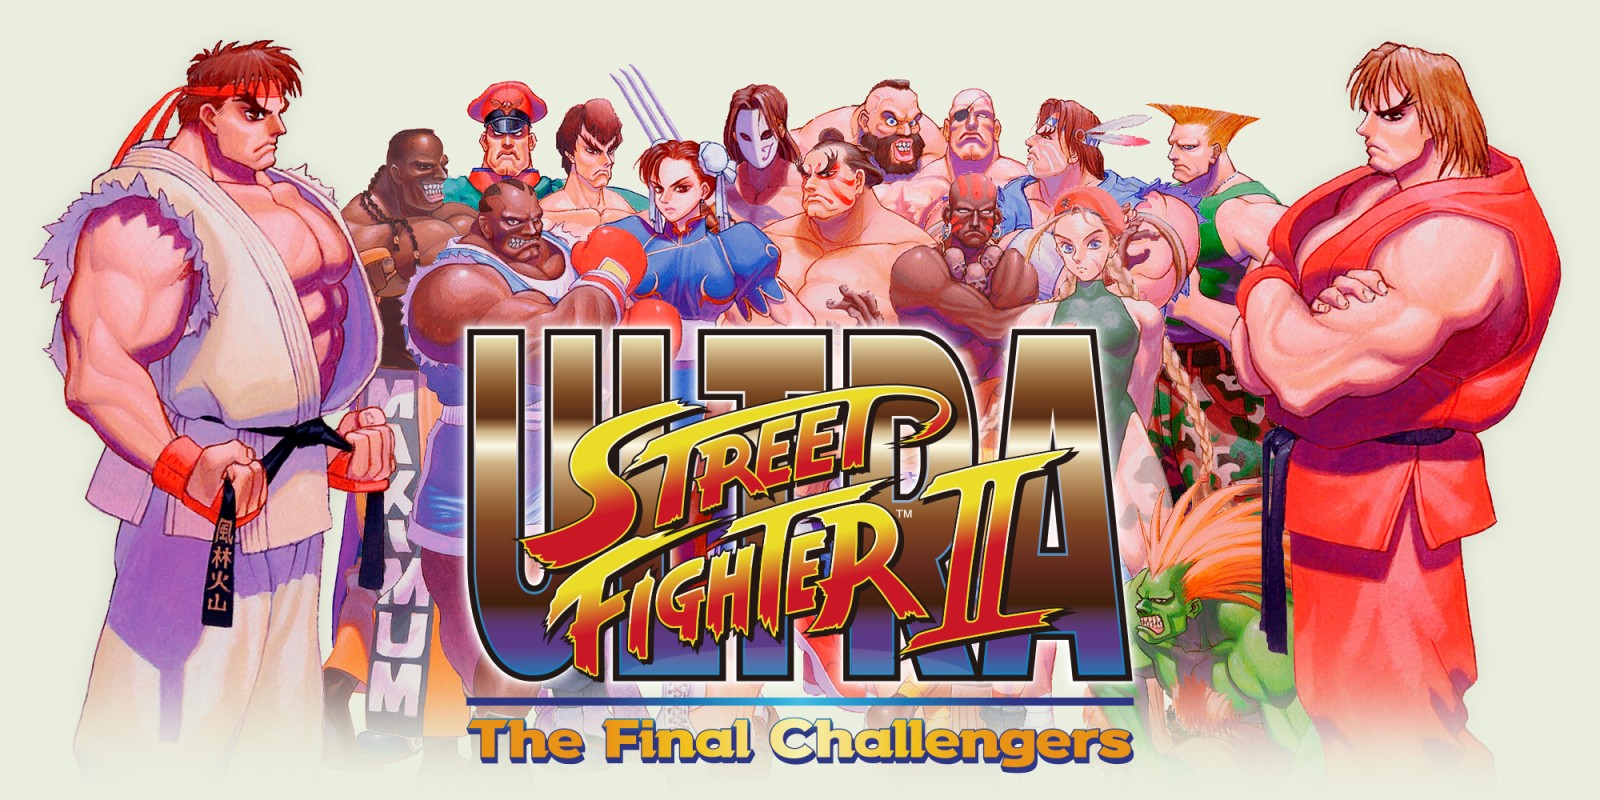 H2x1_NSwitch_UltraStreetFighter2TheFinalChallengers_image1600w